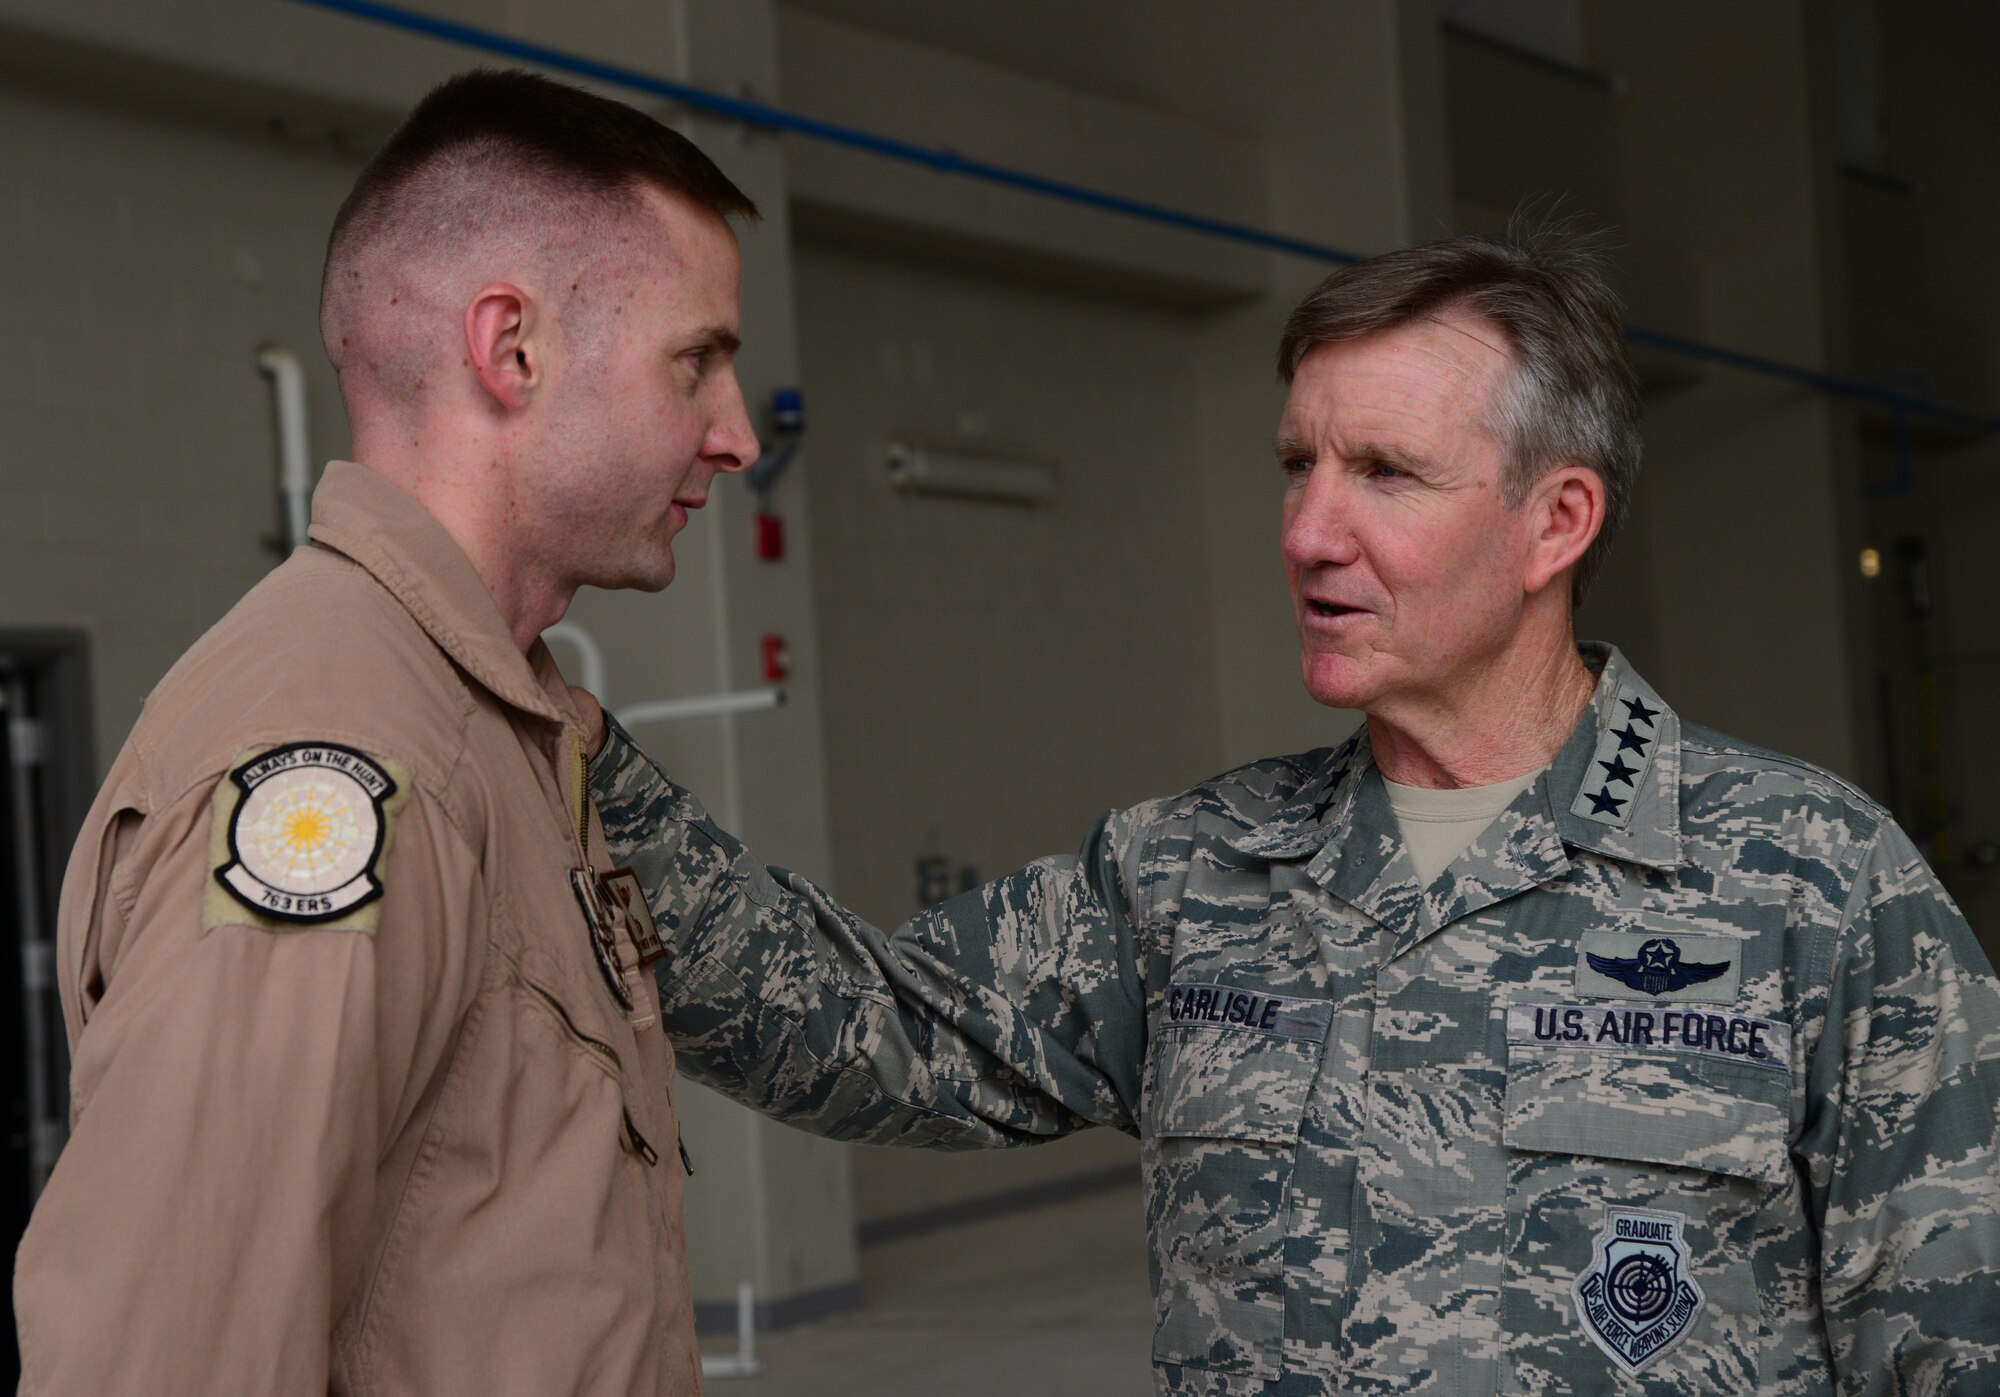 U.S. Air Force Gen. Hawk Carlisle, commander of Air Combat Command, thanks Tech. Sgt. Matthew Otteman, 763rd Expeditionary Reconnaissance Squadron, during his base visit, Nov. 25, 2014, at Al Udeid Air Base, Qatar. Otteman, who is a production supervisor, was selected by his leadership to represent his squadron.  (U.S. Air Force photo by Senior Airman Kia Atkins)